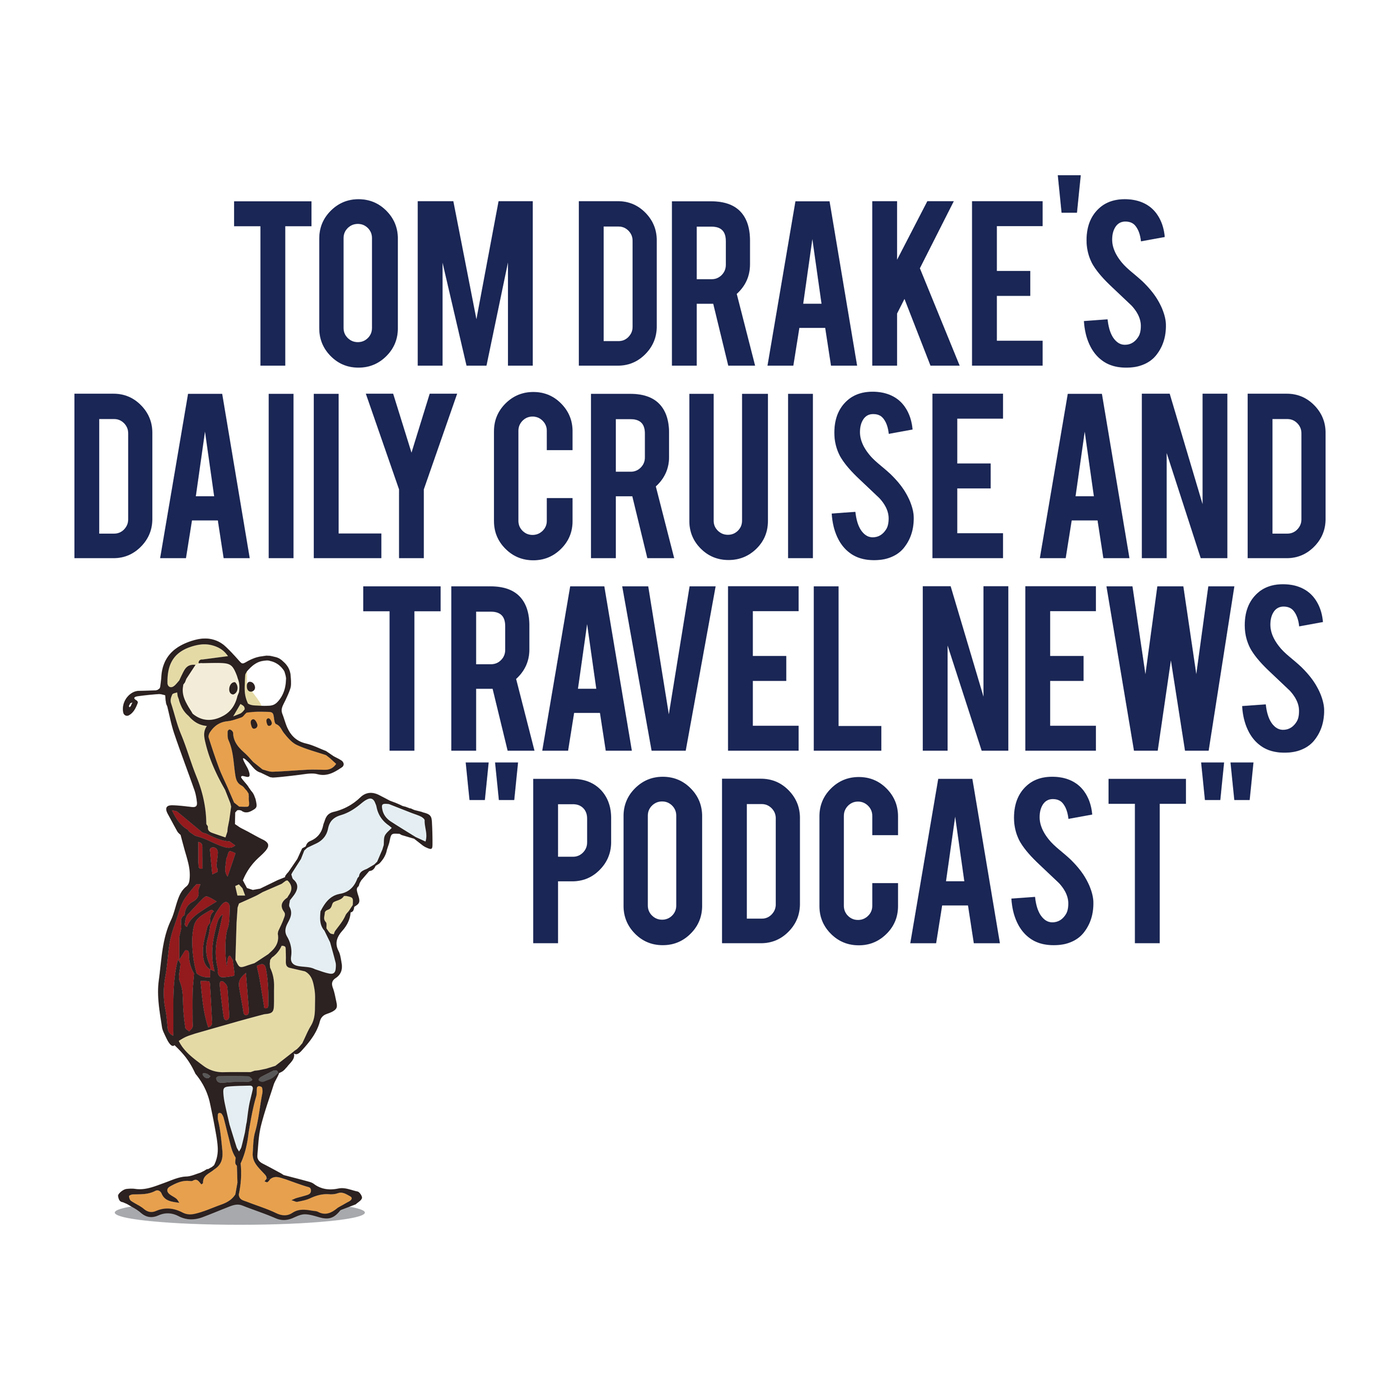  Podcast for Friday, January 13, 2023. Amtrak Auto Train Trip More Unpleasant Than Usual!